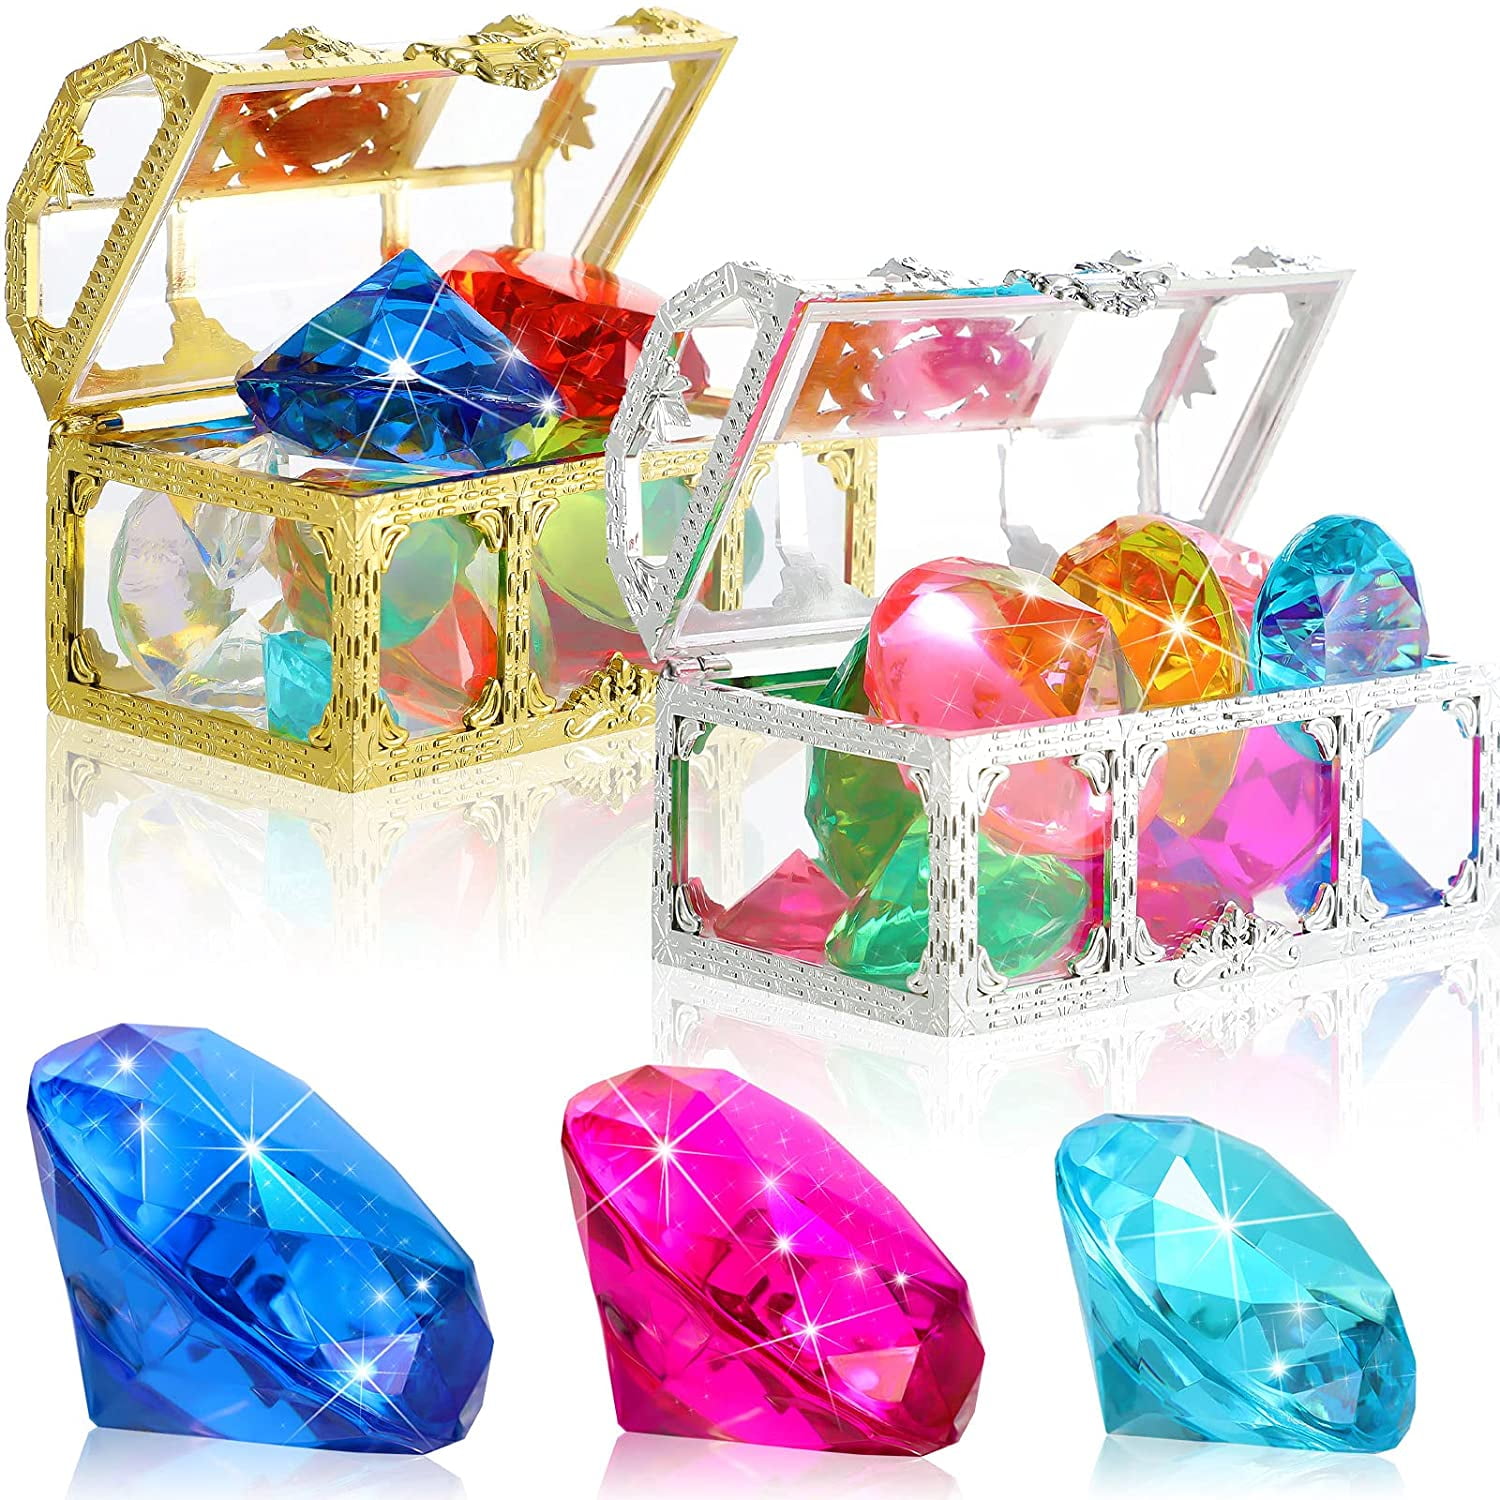 40 Pieces Diving Diamonds Set Diving Gems Pool Toys Colorful Summer Swimming Pool Diamonds Acrylic Gemstones Boy Girl Toys with 2 Pieces Treasure Pirate Boxes Gold Sliver Chests Underwater Party Toy 